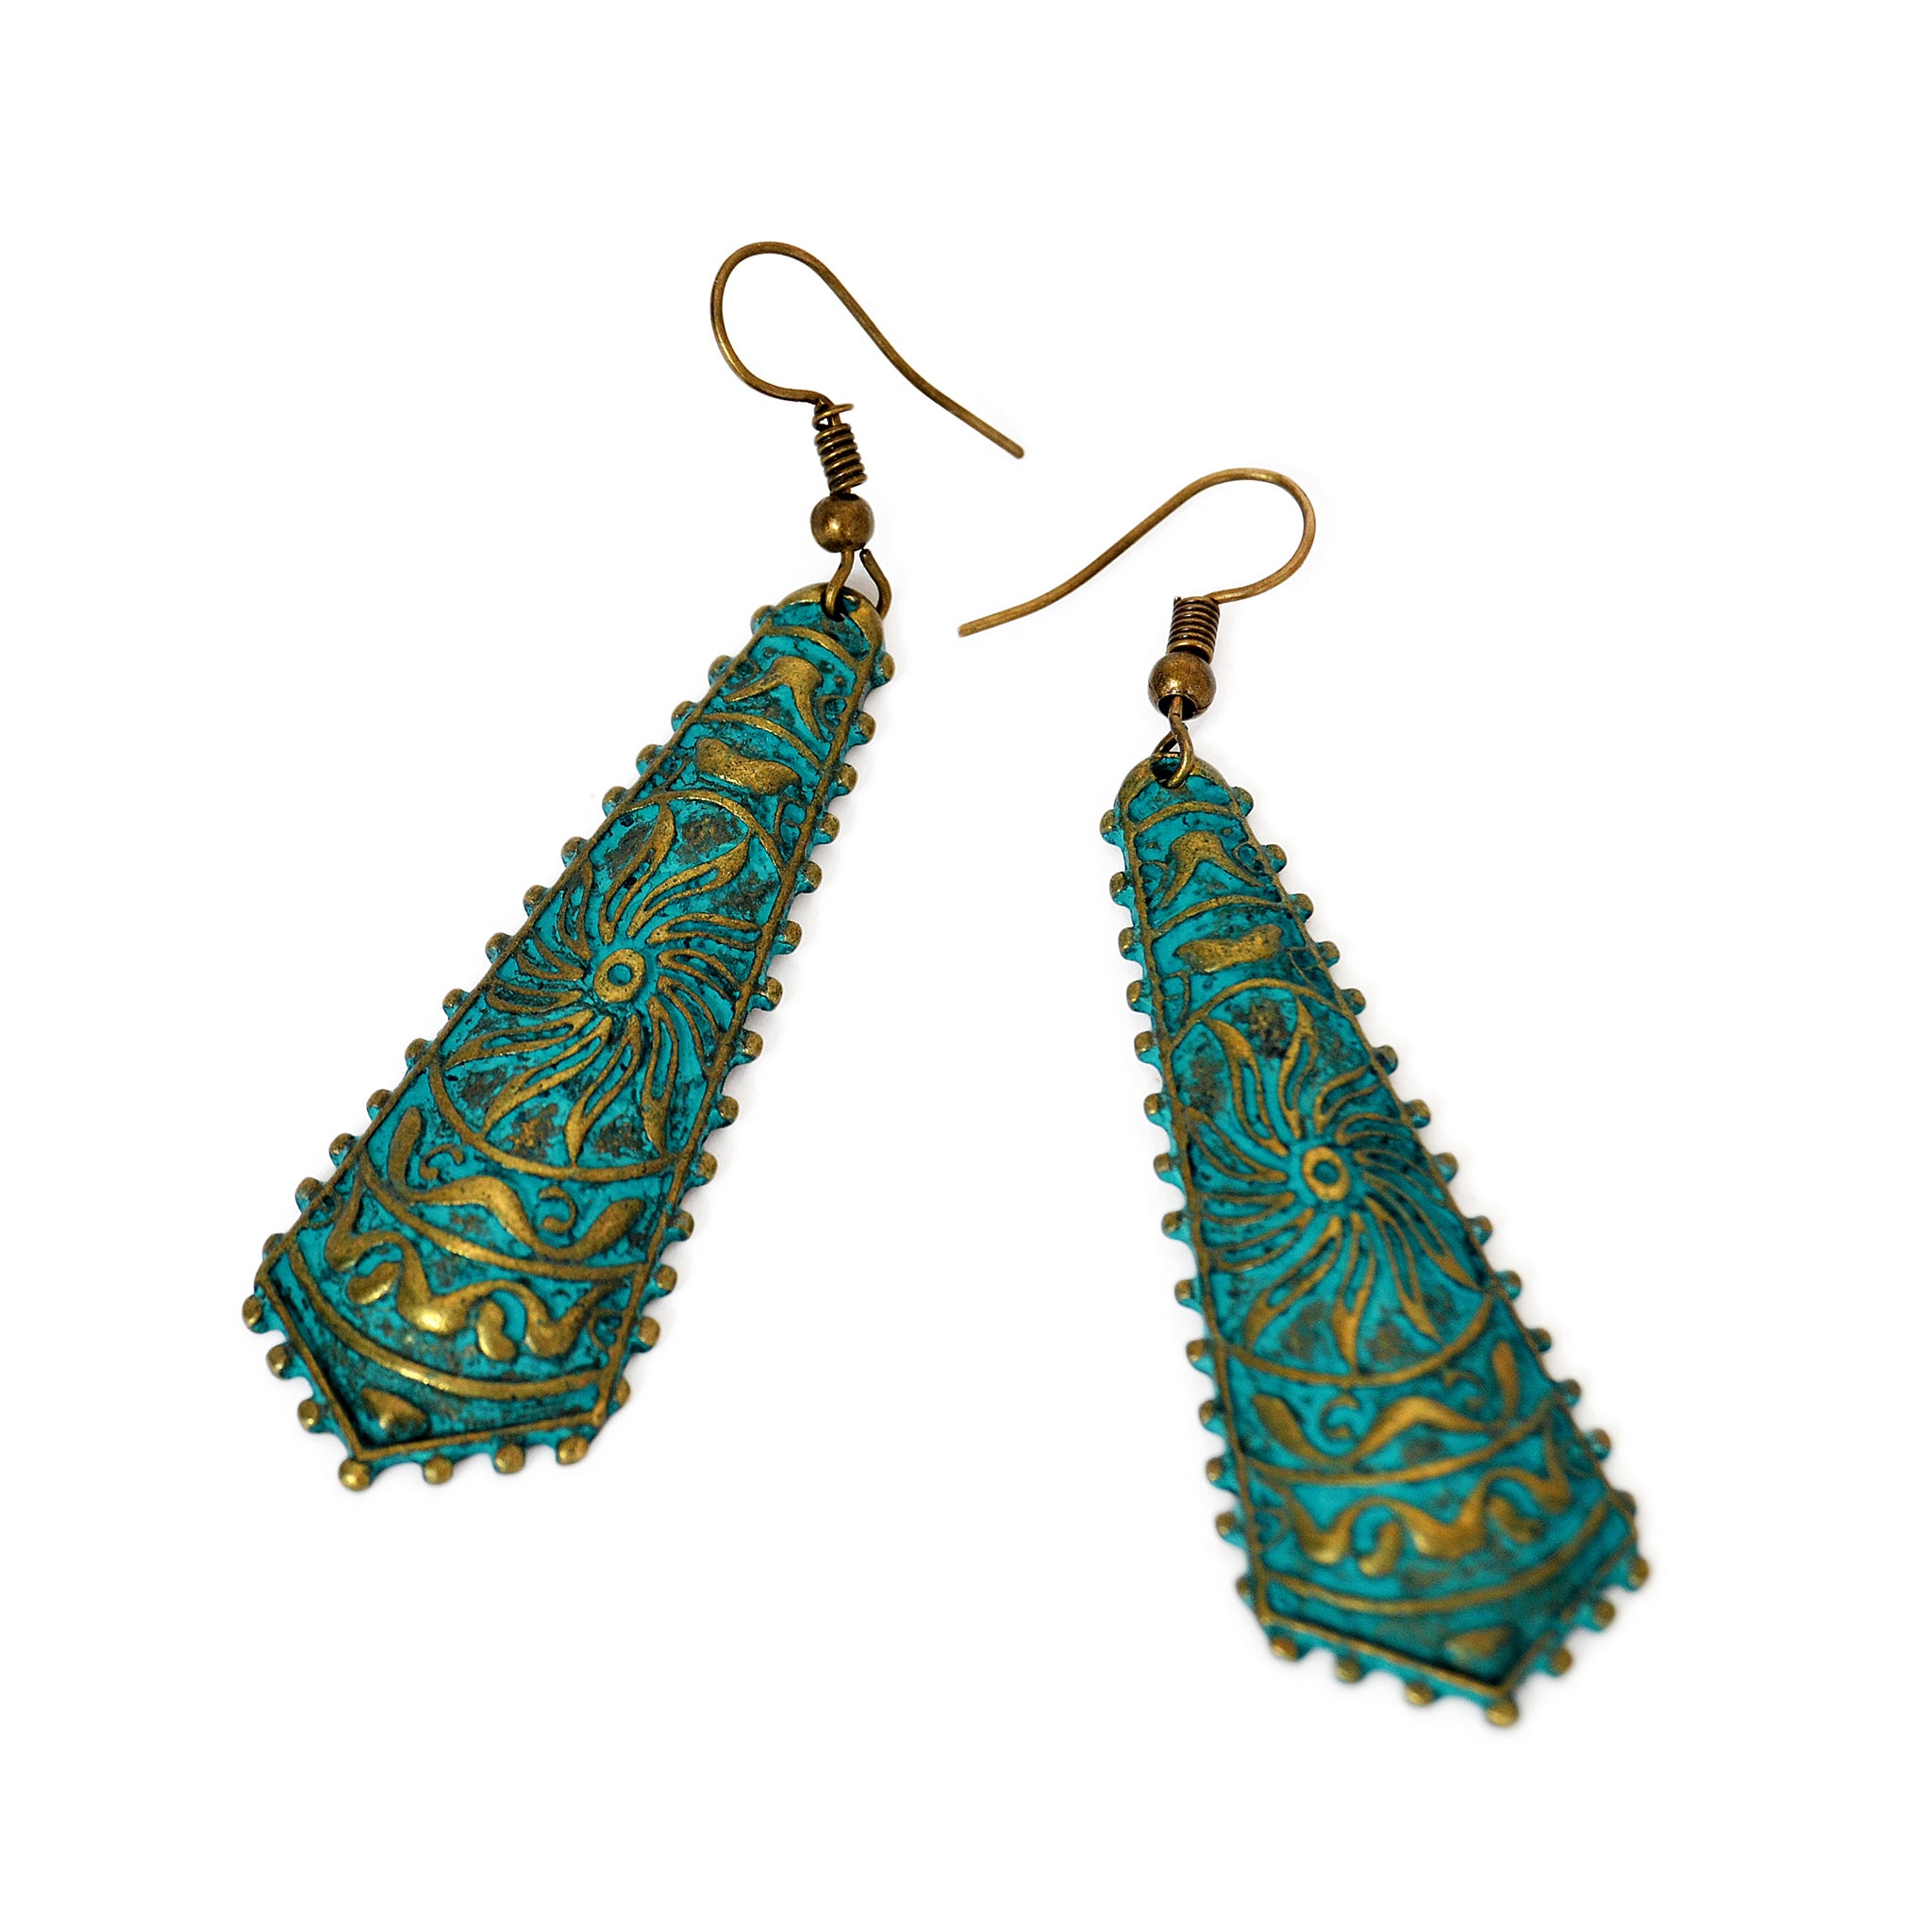 Drop hook earrings with etched gold sun and green patina on brass